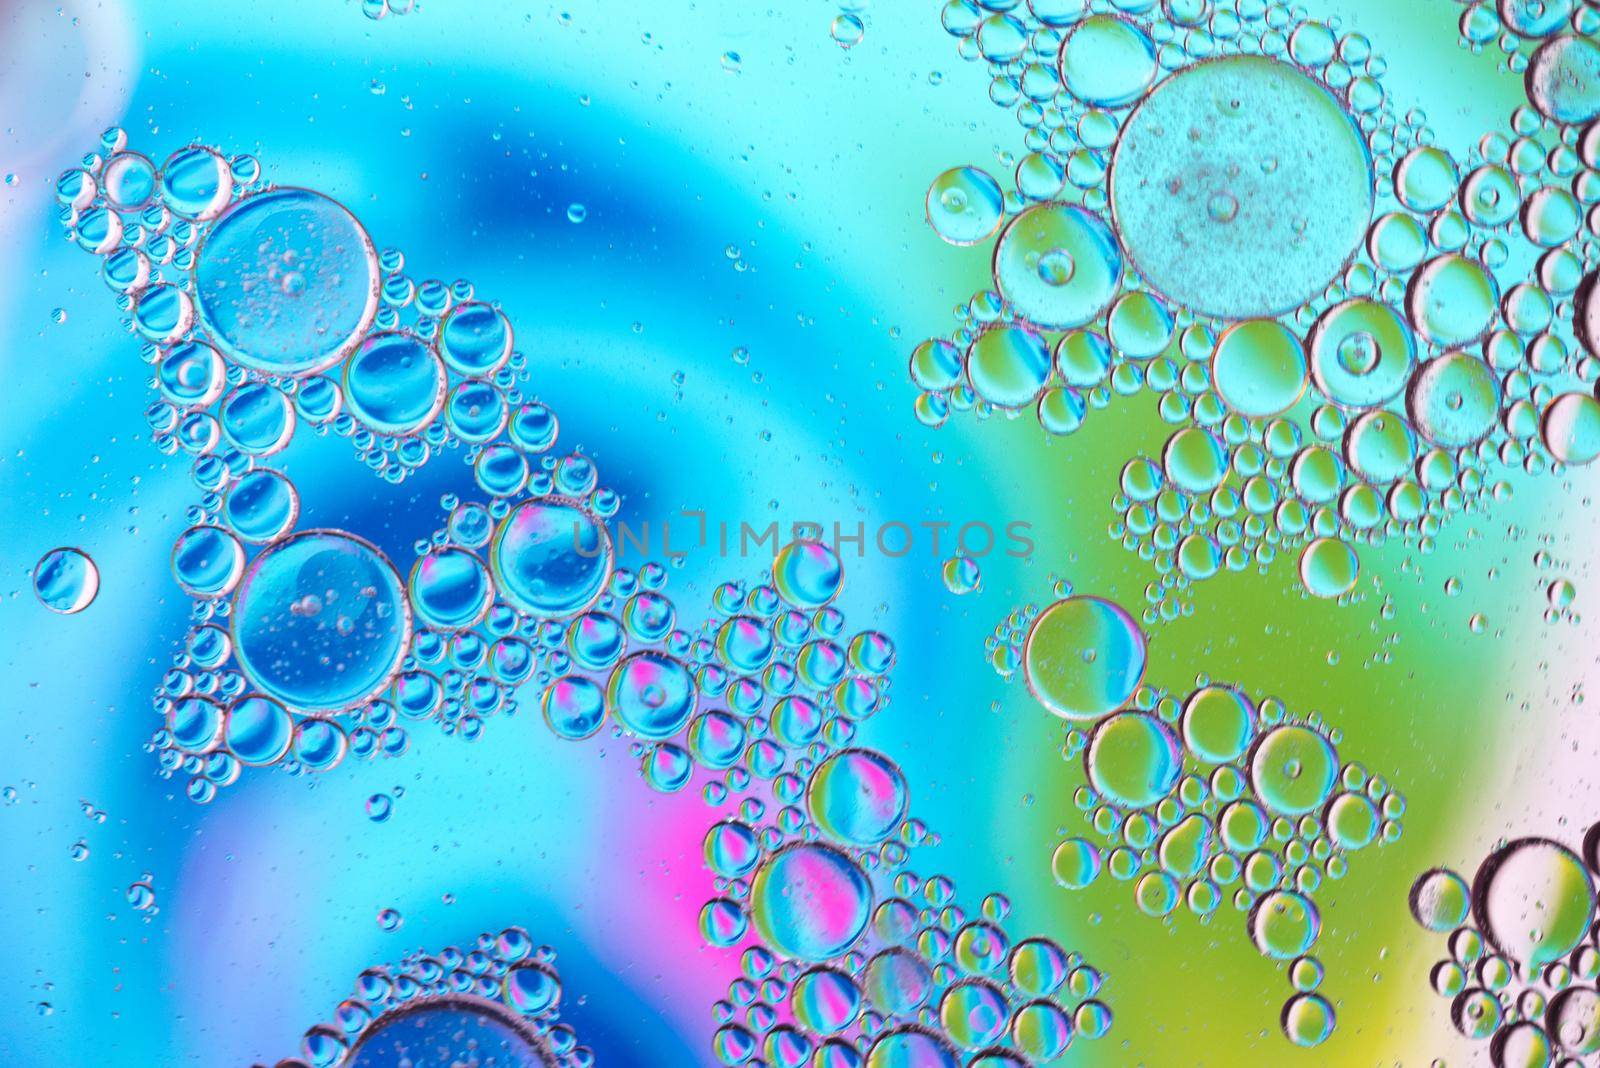 Oil drops in water in motion. Multicolored abstract defocused psychedelic pattern image with mooving boubbles . Abstract background with colorful gradient colors. DOF